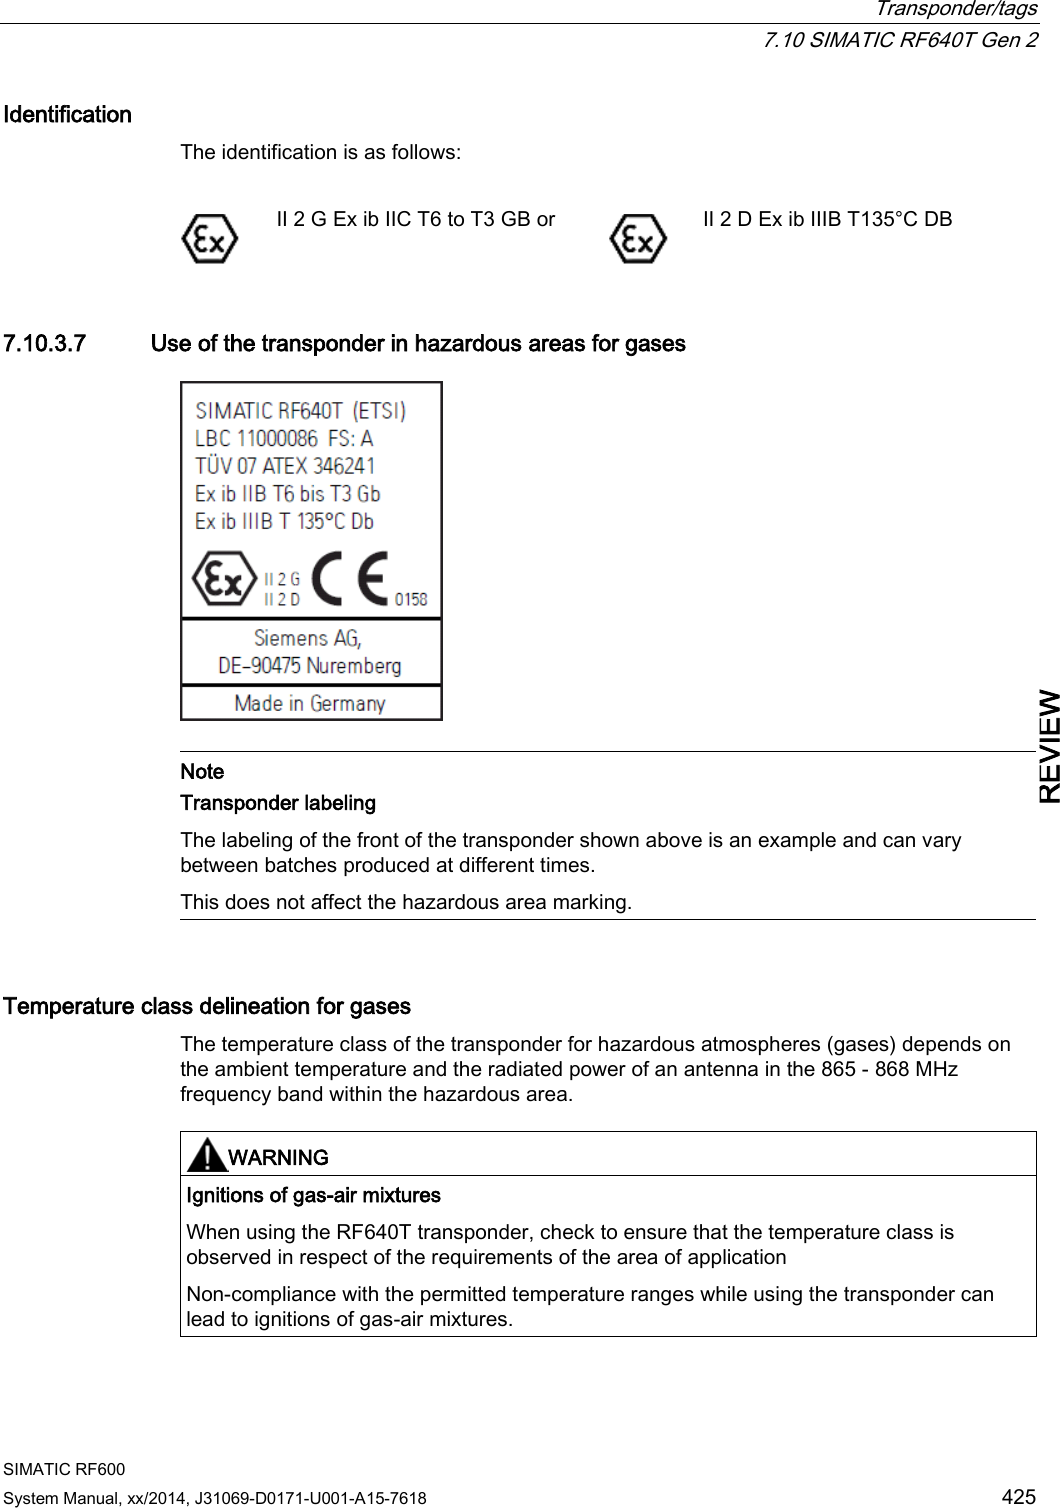  Transponder/tags  7.10 SIMATIC RF640T Gen 2 SIMATIC RF600 System Manual, xx/2014, J31069-D0171-U001-A15-7618 425 REVIEW Identification The identification is as follows:    II 2 G Ex ib IIC T6 to T3 GB or  II 2 D Ex ib IIIB T135°C DB 7.10.3.7 Use of the transponder in hazardous areas for gases    Note Transponder labeling The labeling of the front of the transponder shown above is an example and can vary between batches produced at different times.  This does not affect the hazardous area marking.  Temperature class delineation for gases The temperature class of the transponder for hazardous atmospheres (gases) depends on the ambient temperature and the radiated power of an antenna in the 865 - 868 MHz frequency band within the hazardous area.    WARNING Ignitions of gas-air mixtures When using the RF640T transponder, check to ensure that the temperature class is observed in respect of the requirements of the area of application Non-compliance with the permitted temperature ranges while using the transponder can lead to ignitions of gas-air mixtures.  